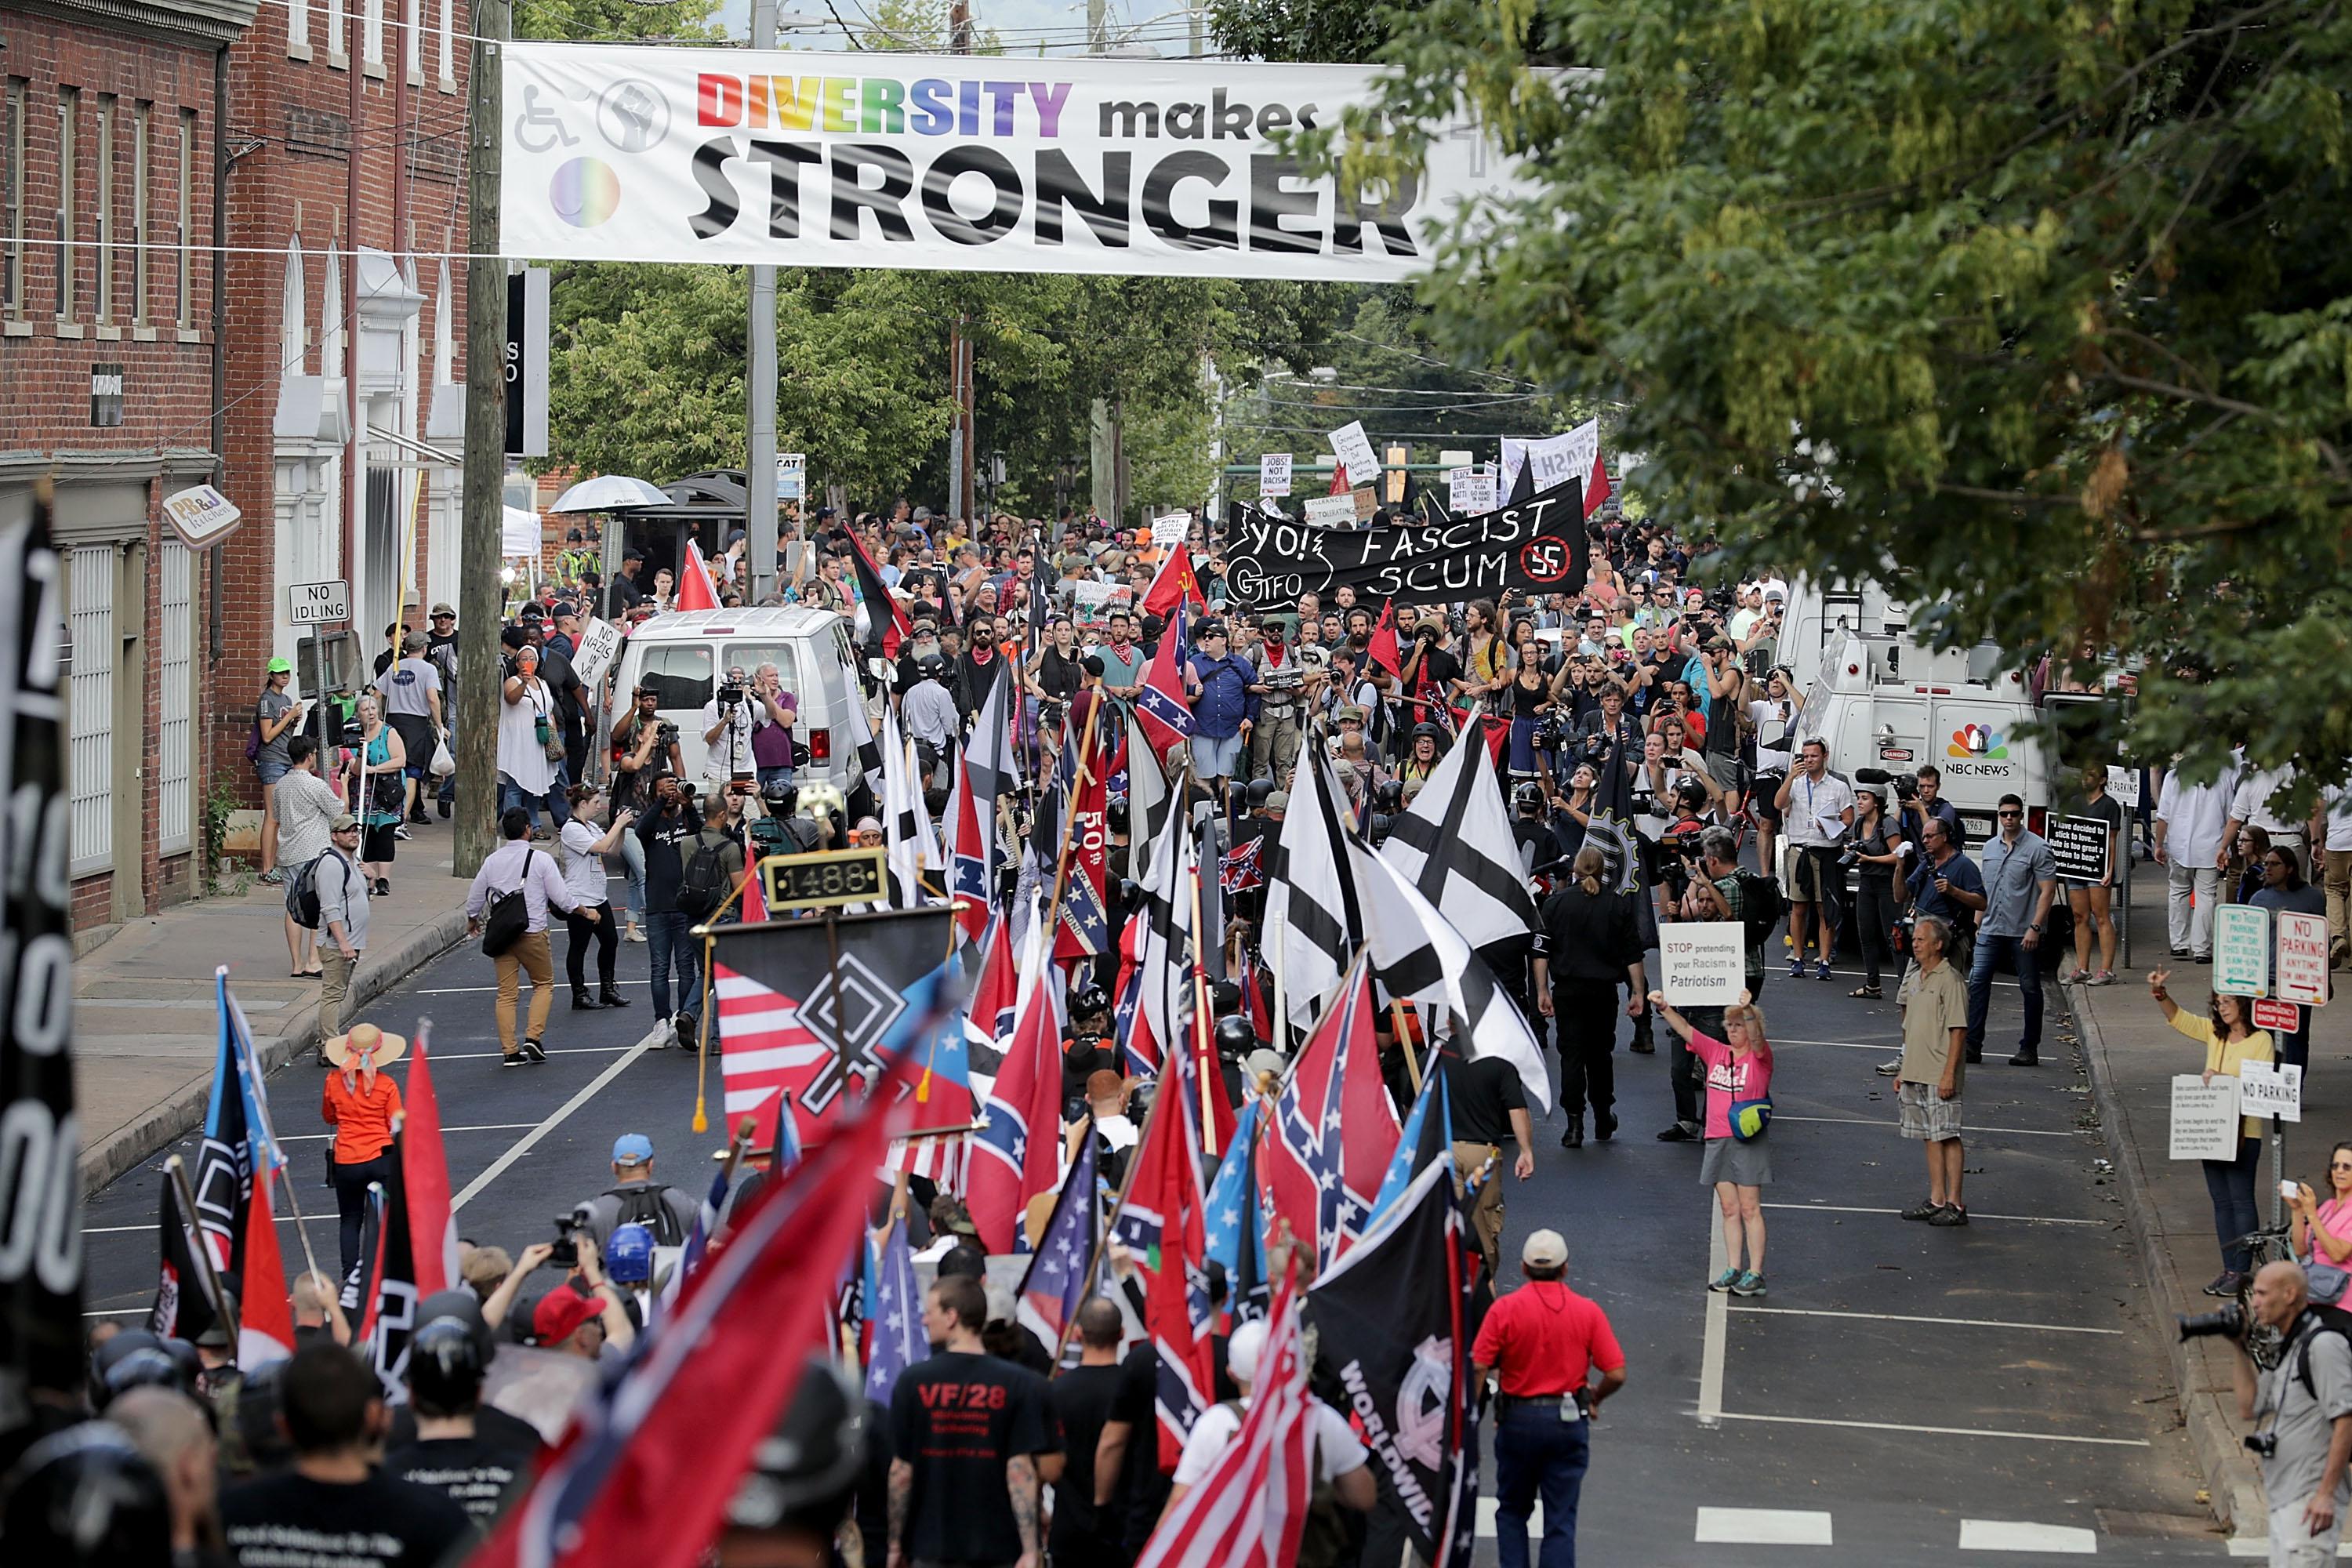 White nationalists and neo-Nazis holding flags march down a street in Charlottesville.